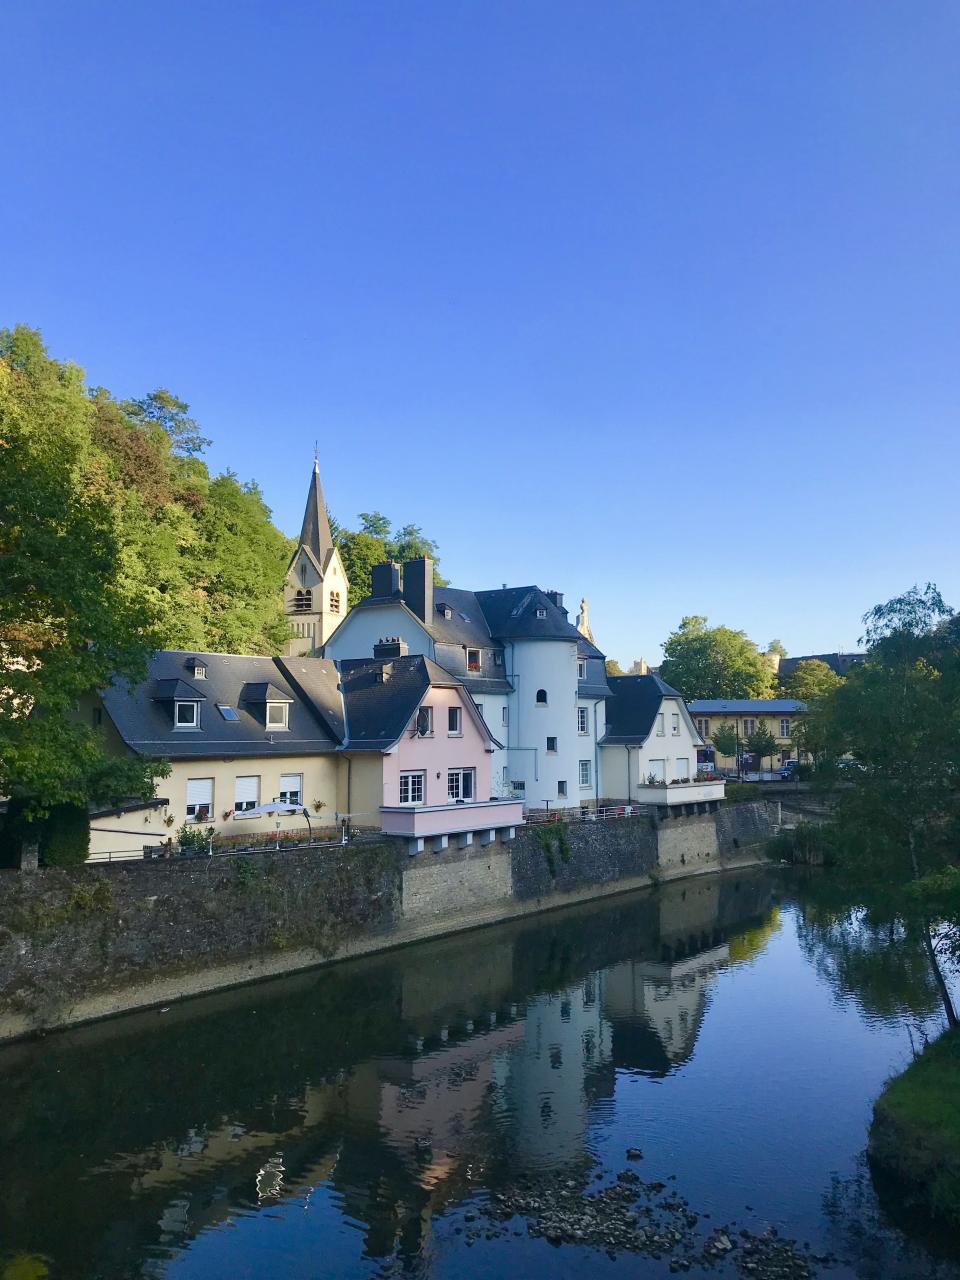 The views near the Azette River in Luxembourg City offer a stunning window into old and modern European life. This photo was taken on Sept. 21, 2019. | Sarah Gambles, Deseret News